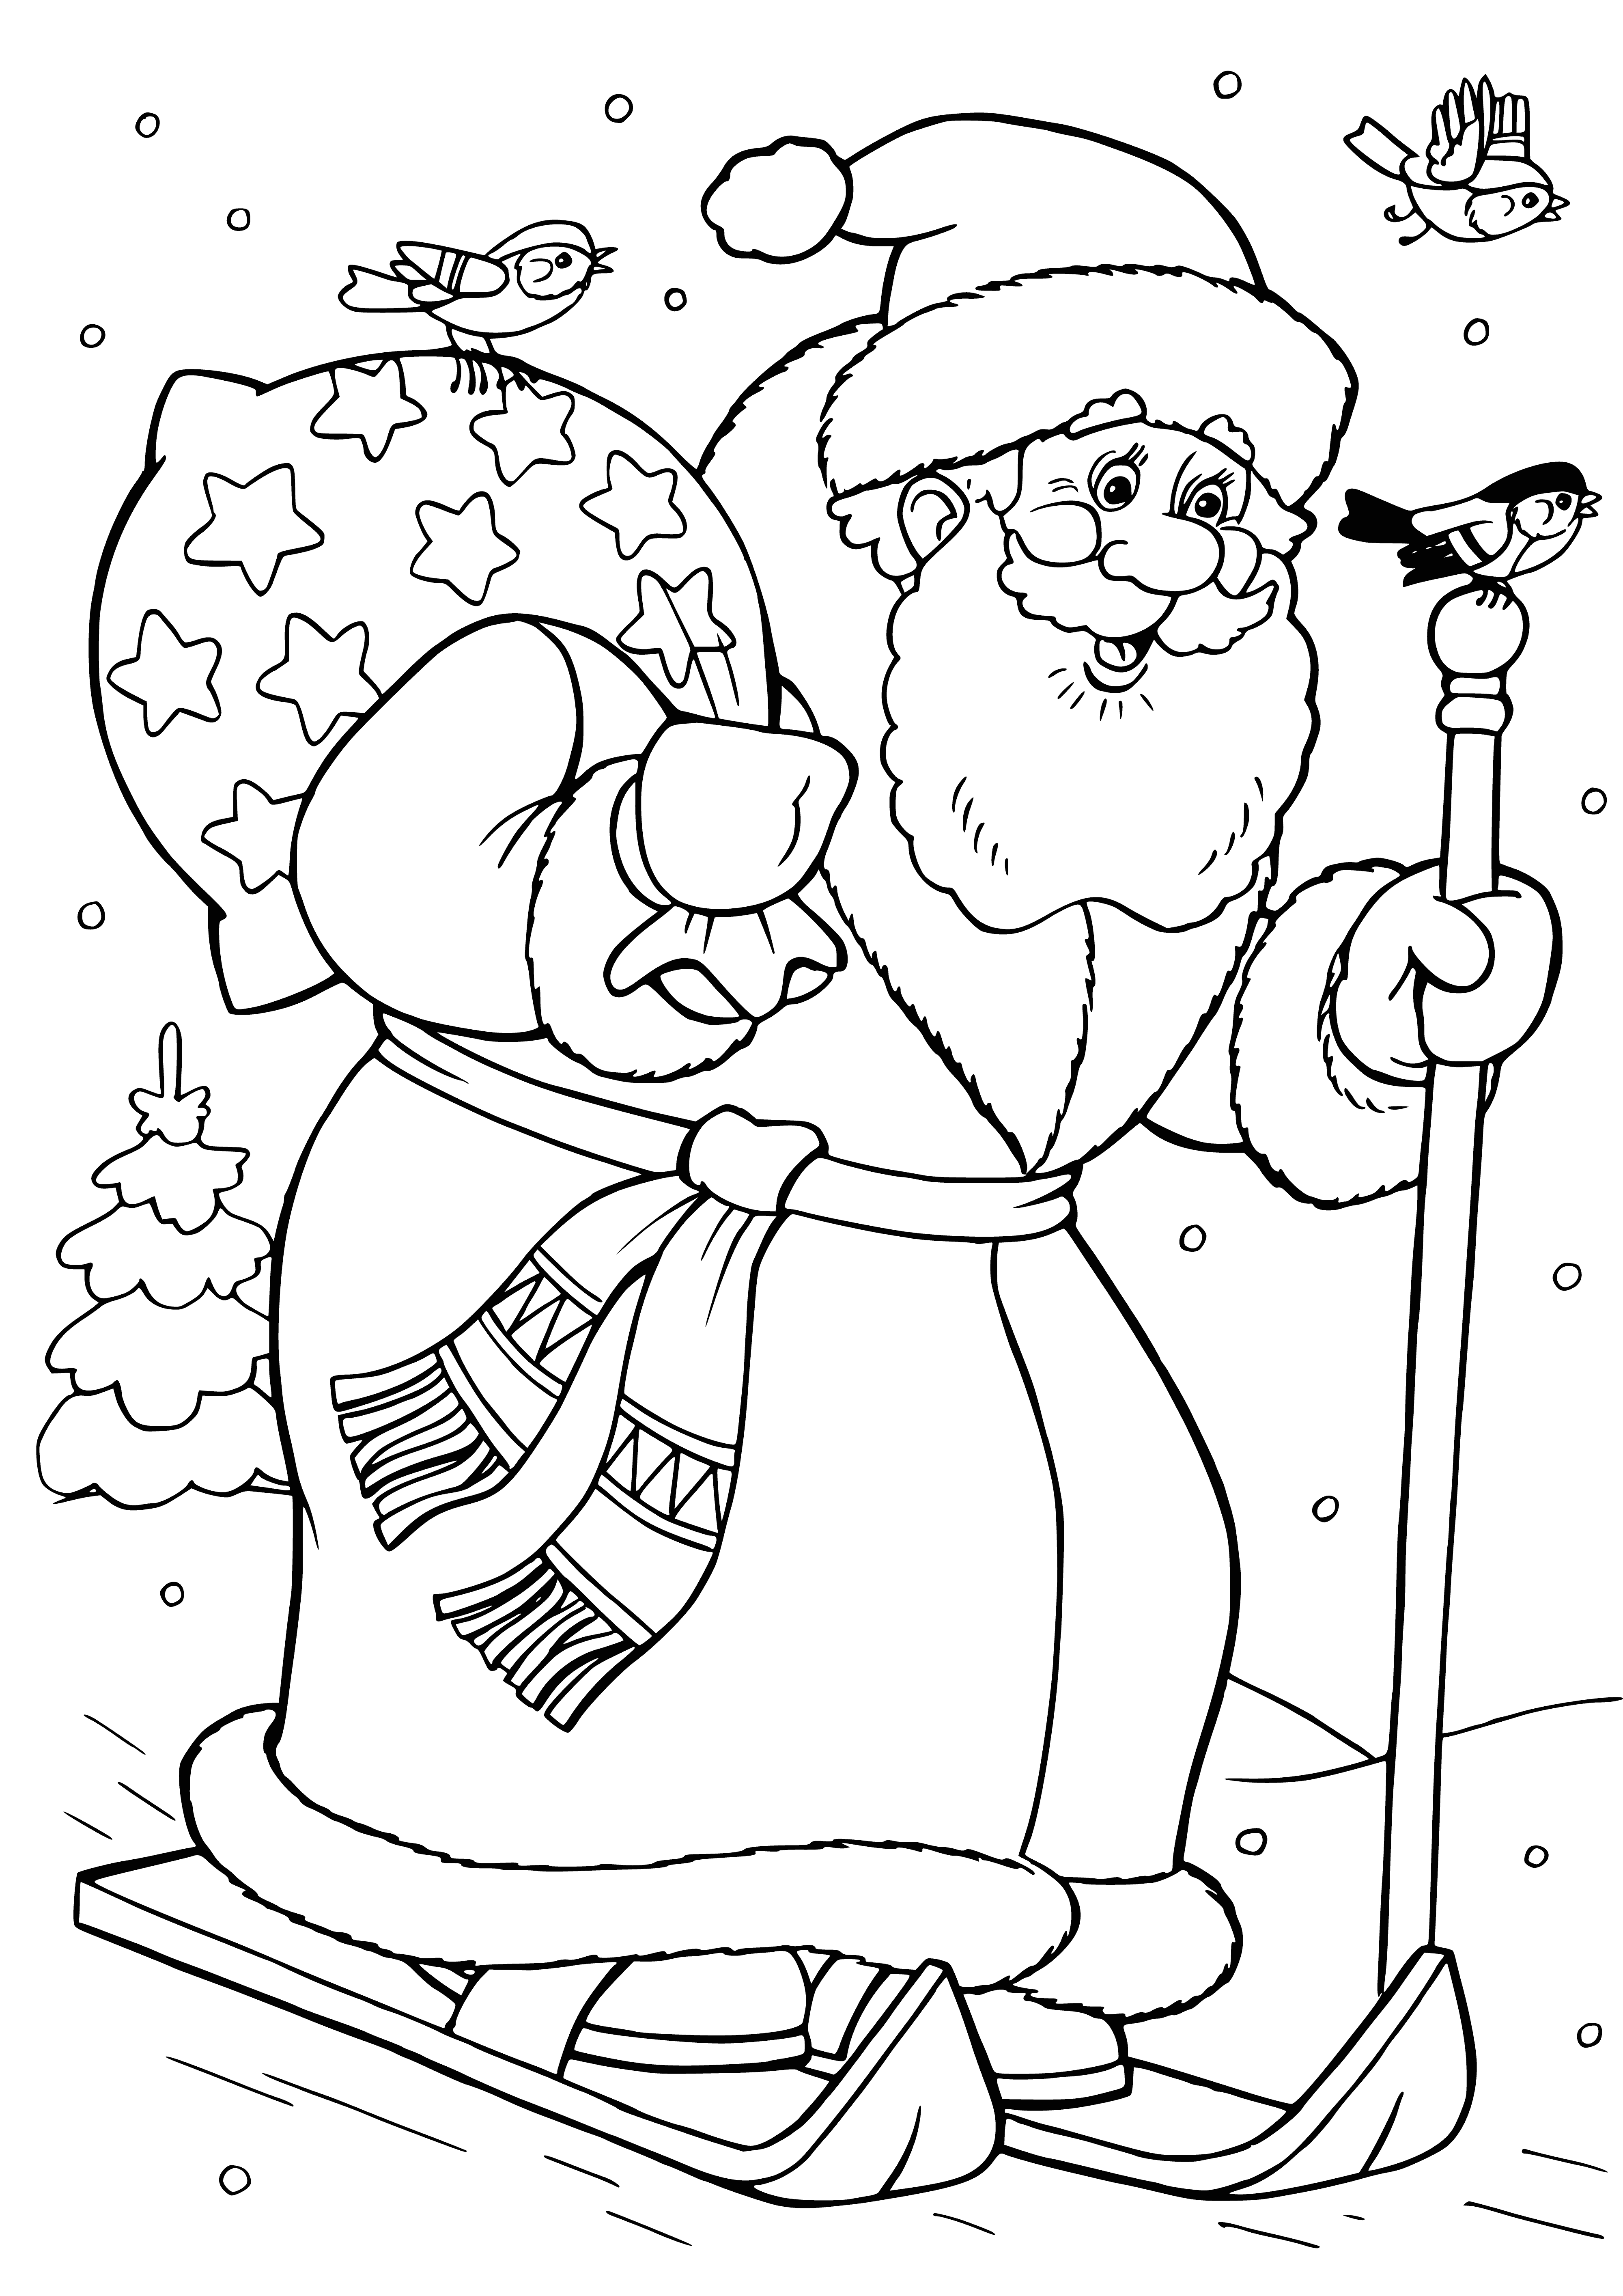 coloring page: Man in red suit skiing down hill, pulling sled with presents, white beard and red hat with white fur brim. #ChristmasEve